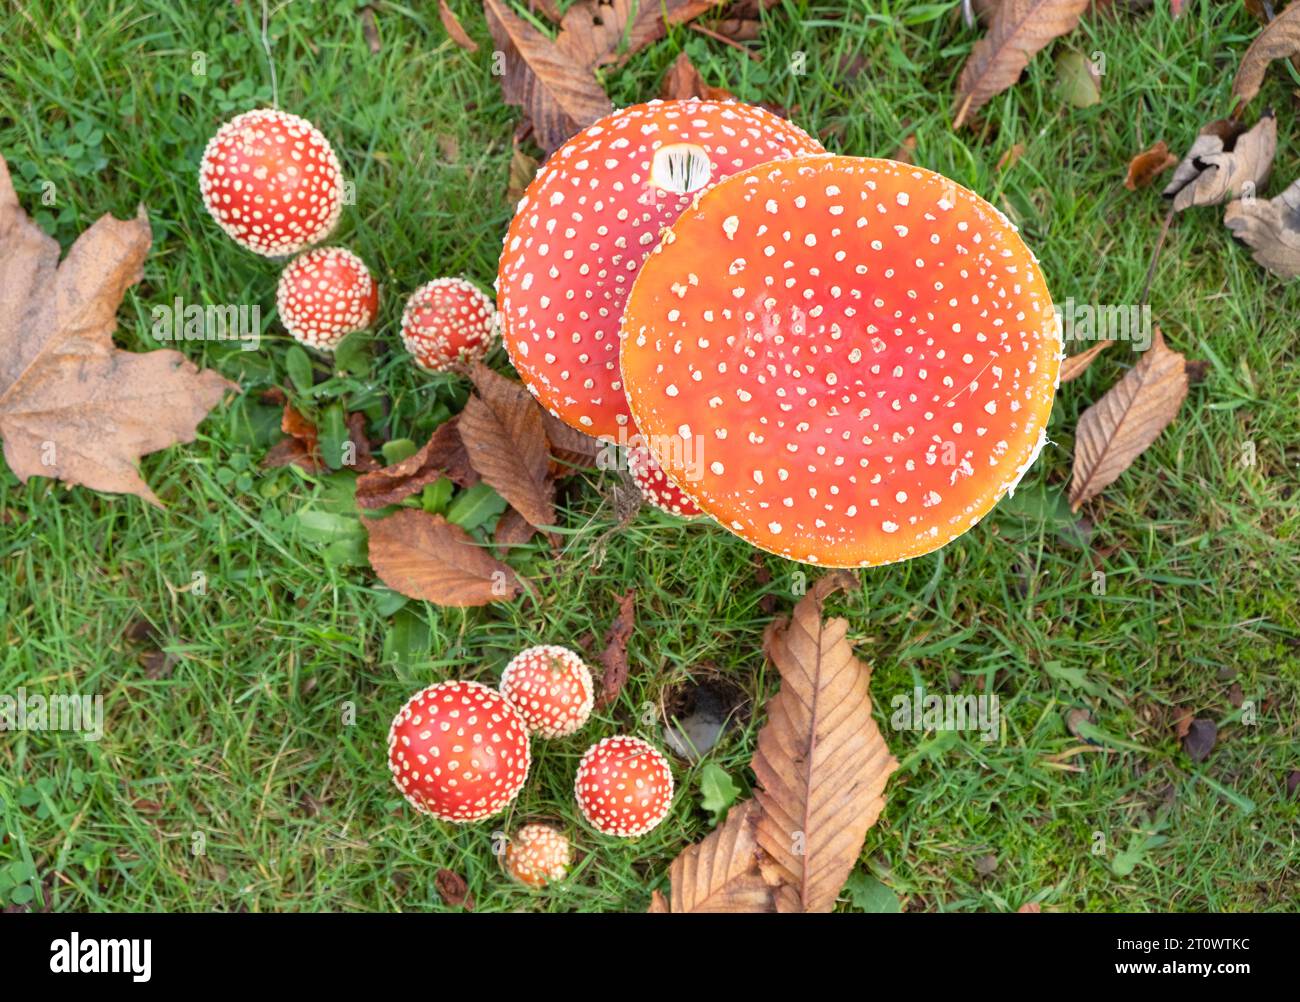 Looking down at a group of Fly Agaric mushrooms, Amanita muscaria, in damp grass.  Photograph shows different stages of growth. Stock Photo